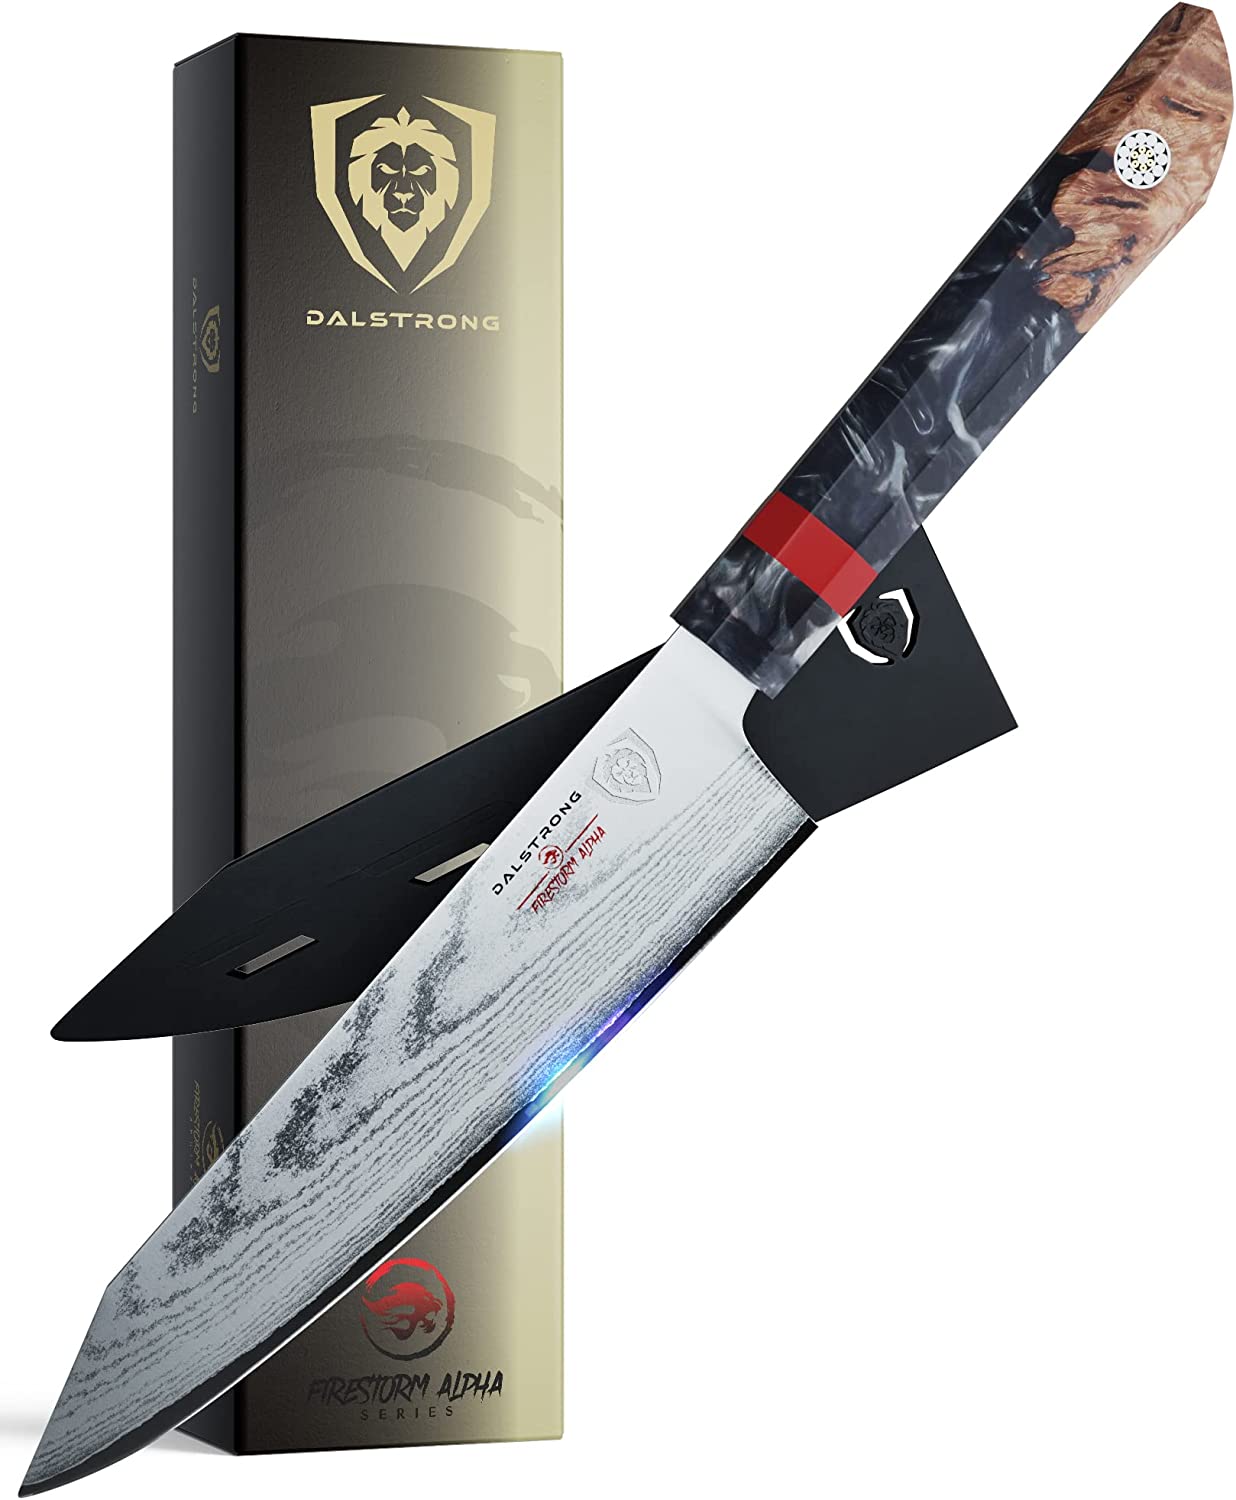 Dalstrong Santoku Knife - 7 inch - Firestorm Alpha Series - Premium 10CR15MOV High-Carbon Steel - Traditional Japanese Wa Stabilized Wood & Resin